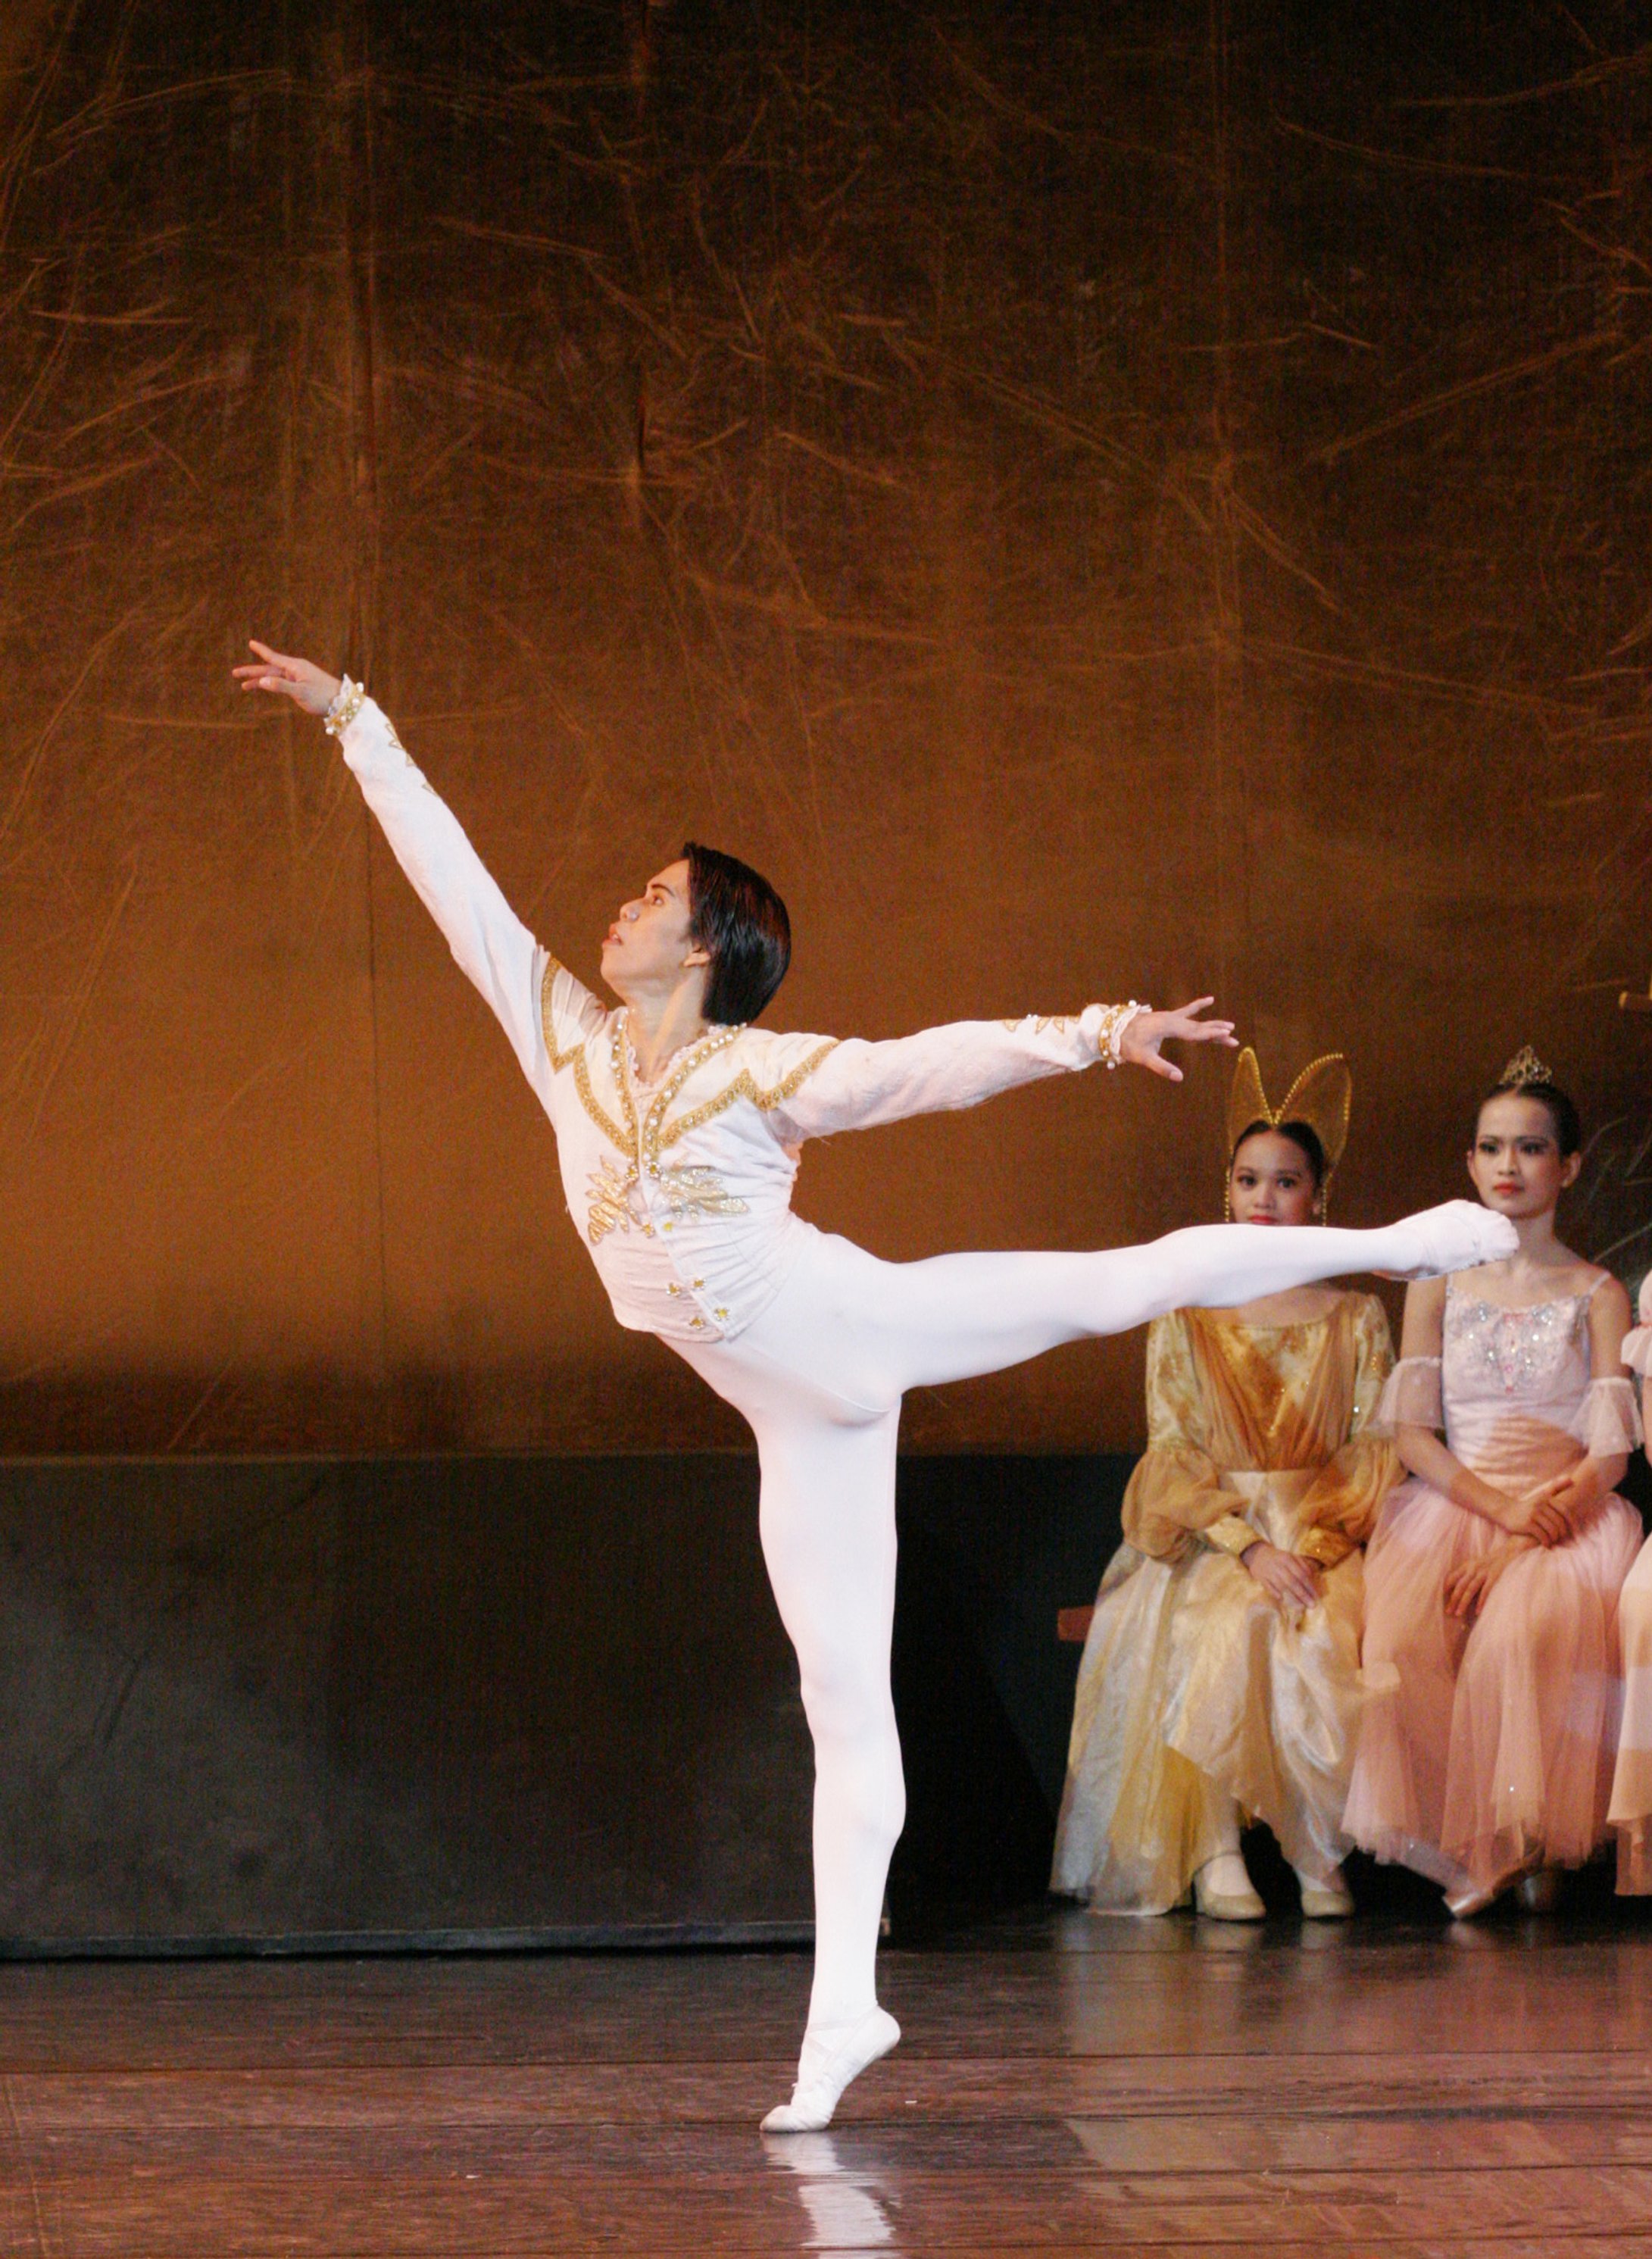    Romantic, passionate and sensitive are the words that have been used to describe Siegfried whom Francis Cascaño danced as in 2005. Photo by Ocs Alvarez   